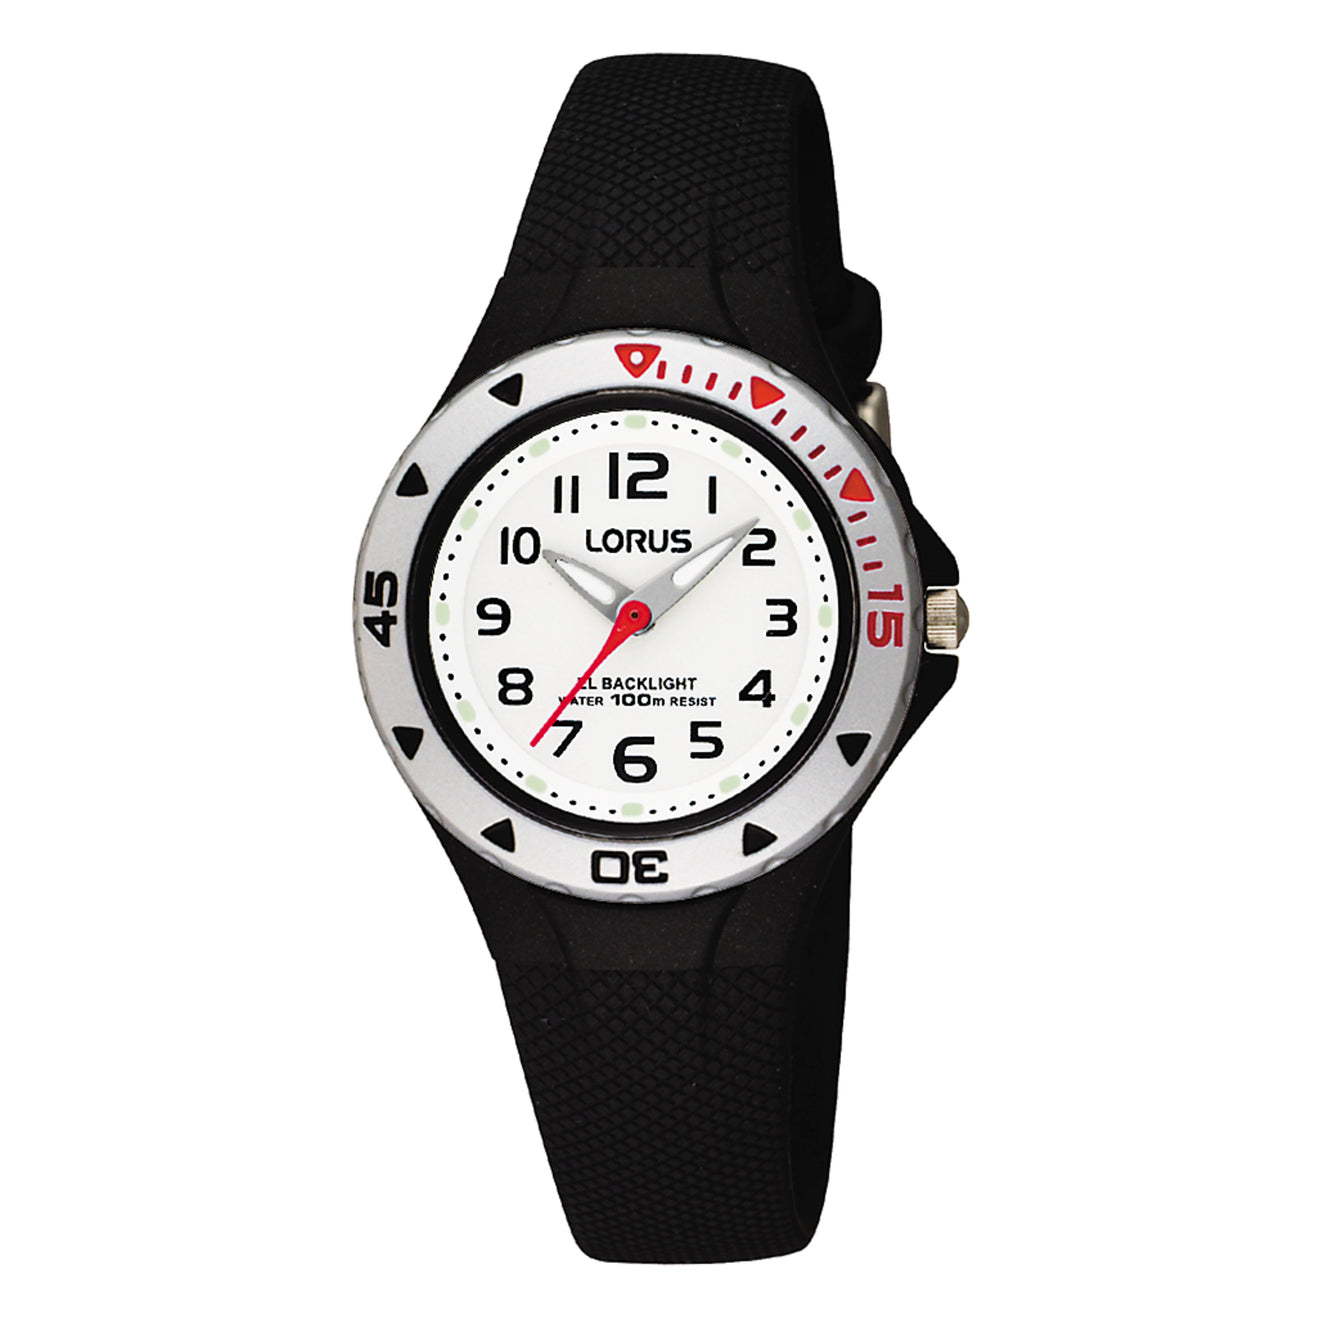 Lorus youth sports Blk/Whit